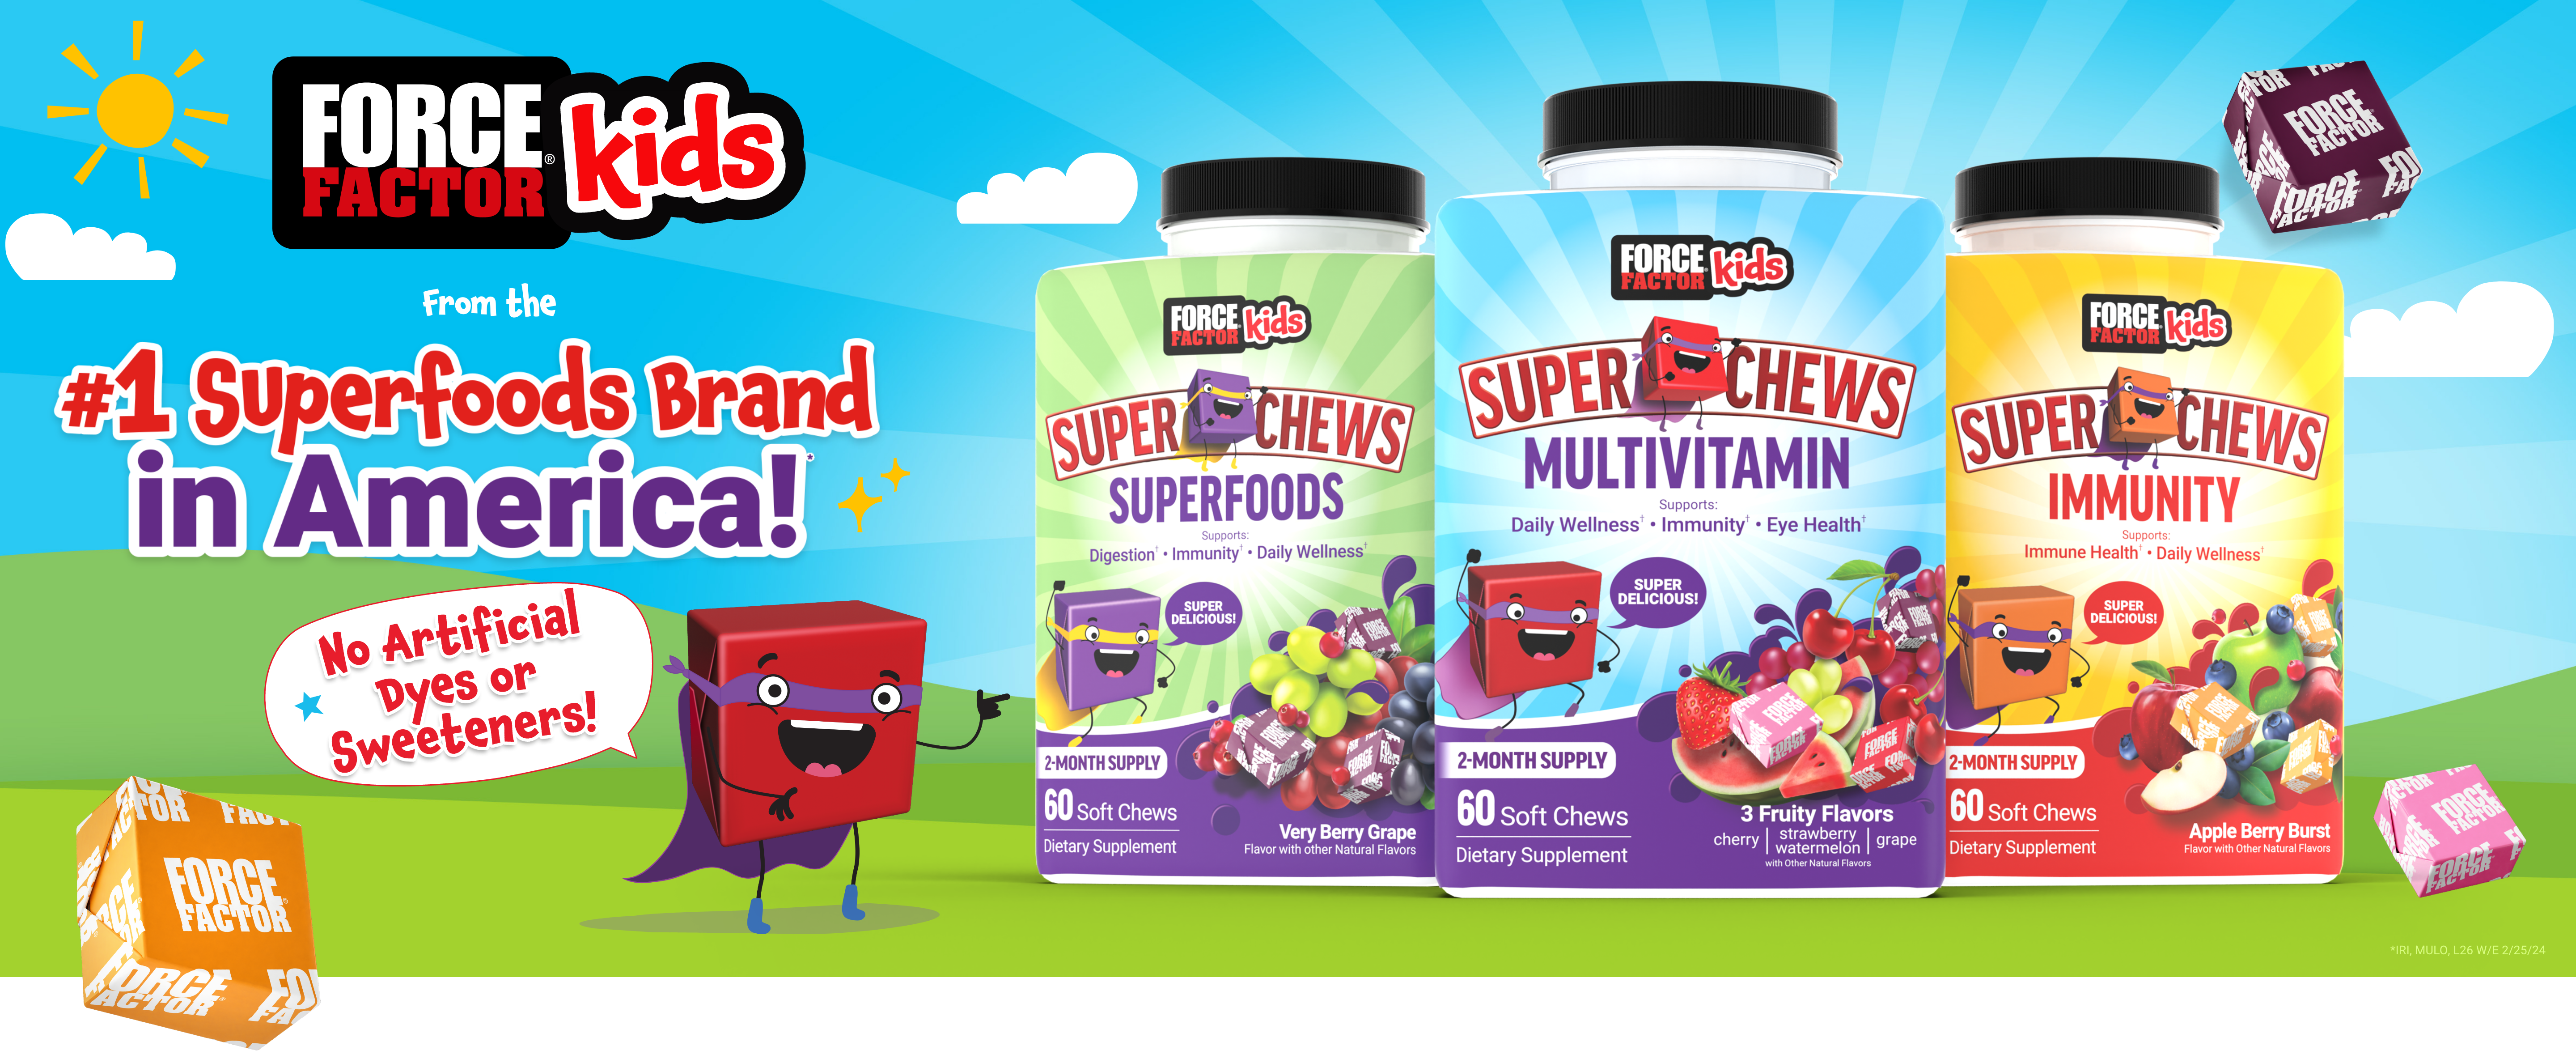 Force Factor Kids logo and #1 Superfoods Brand in America. Force Factor Kids Superfoods, Multivitamin, and Immunity Super Chews.